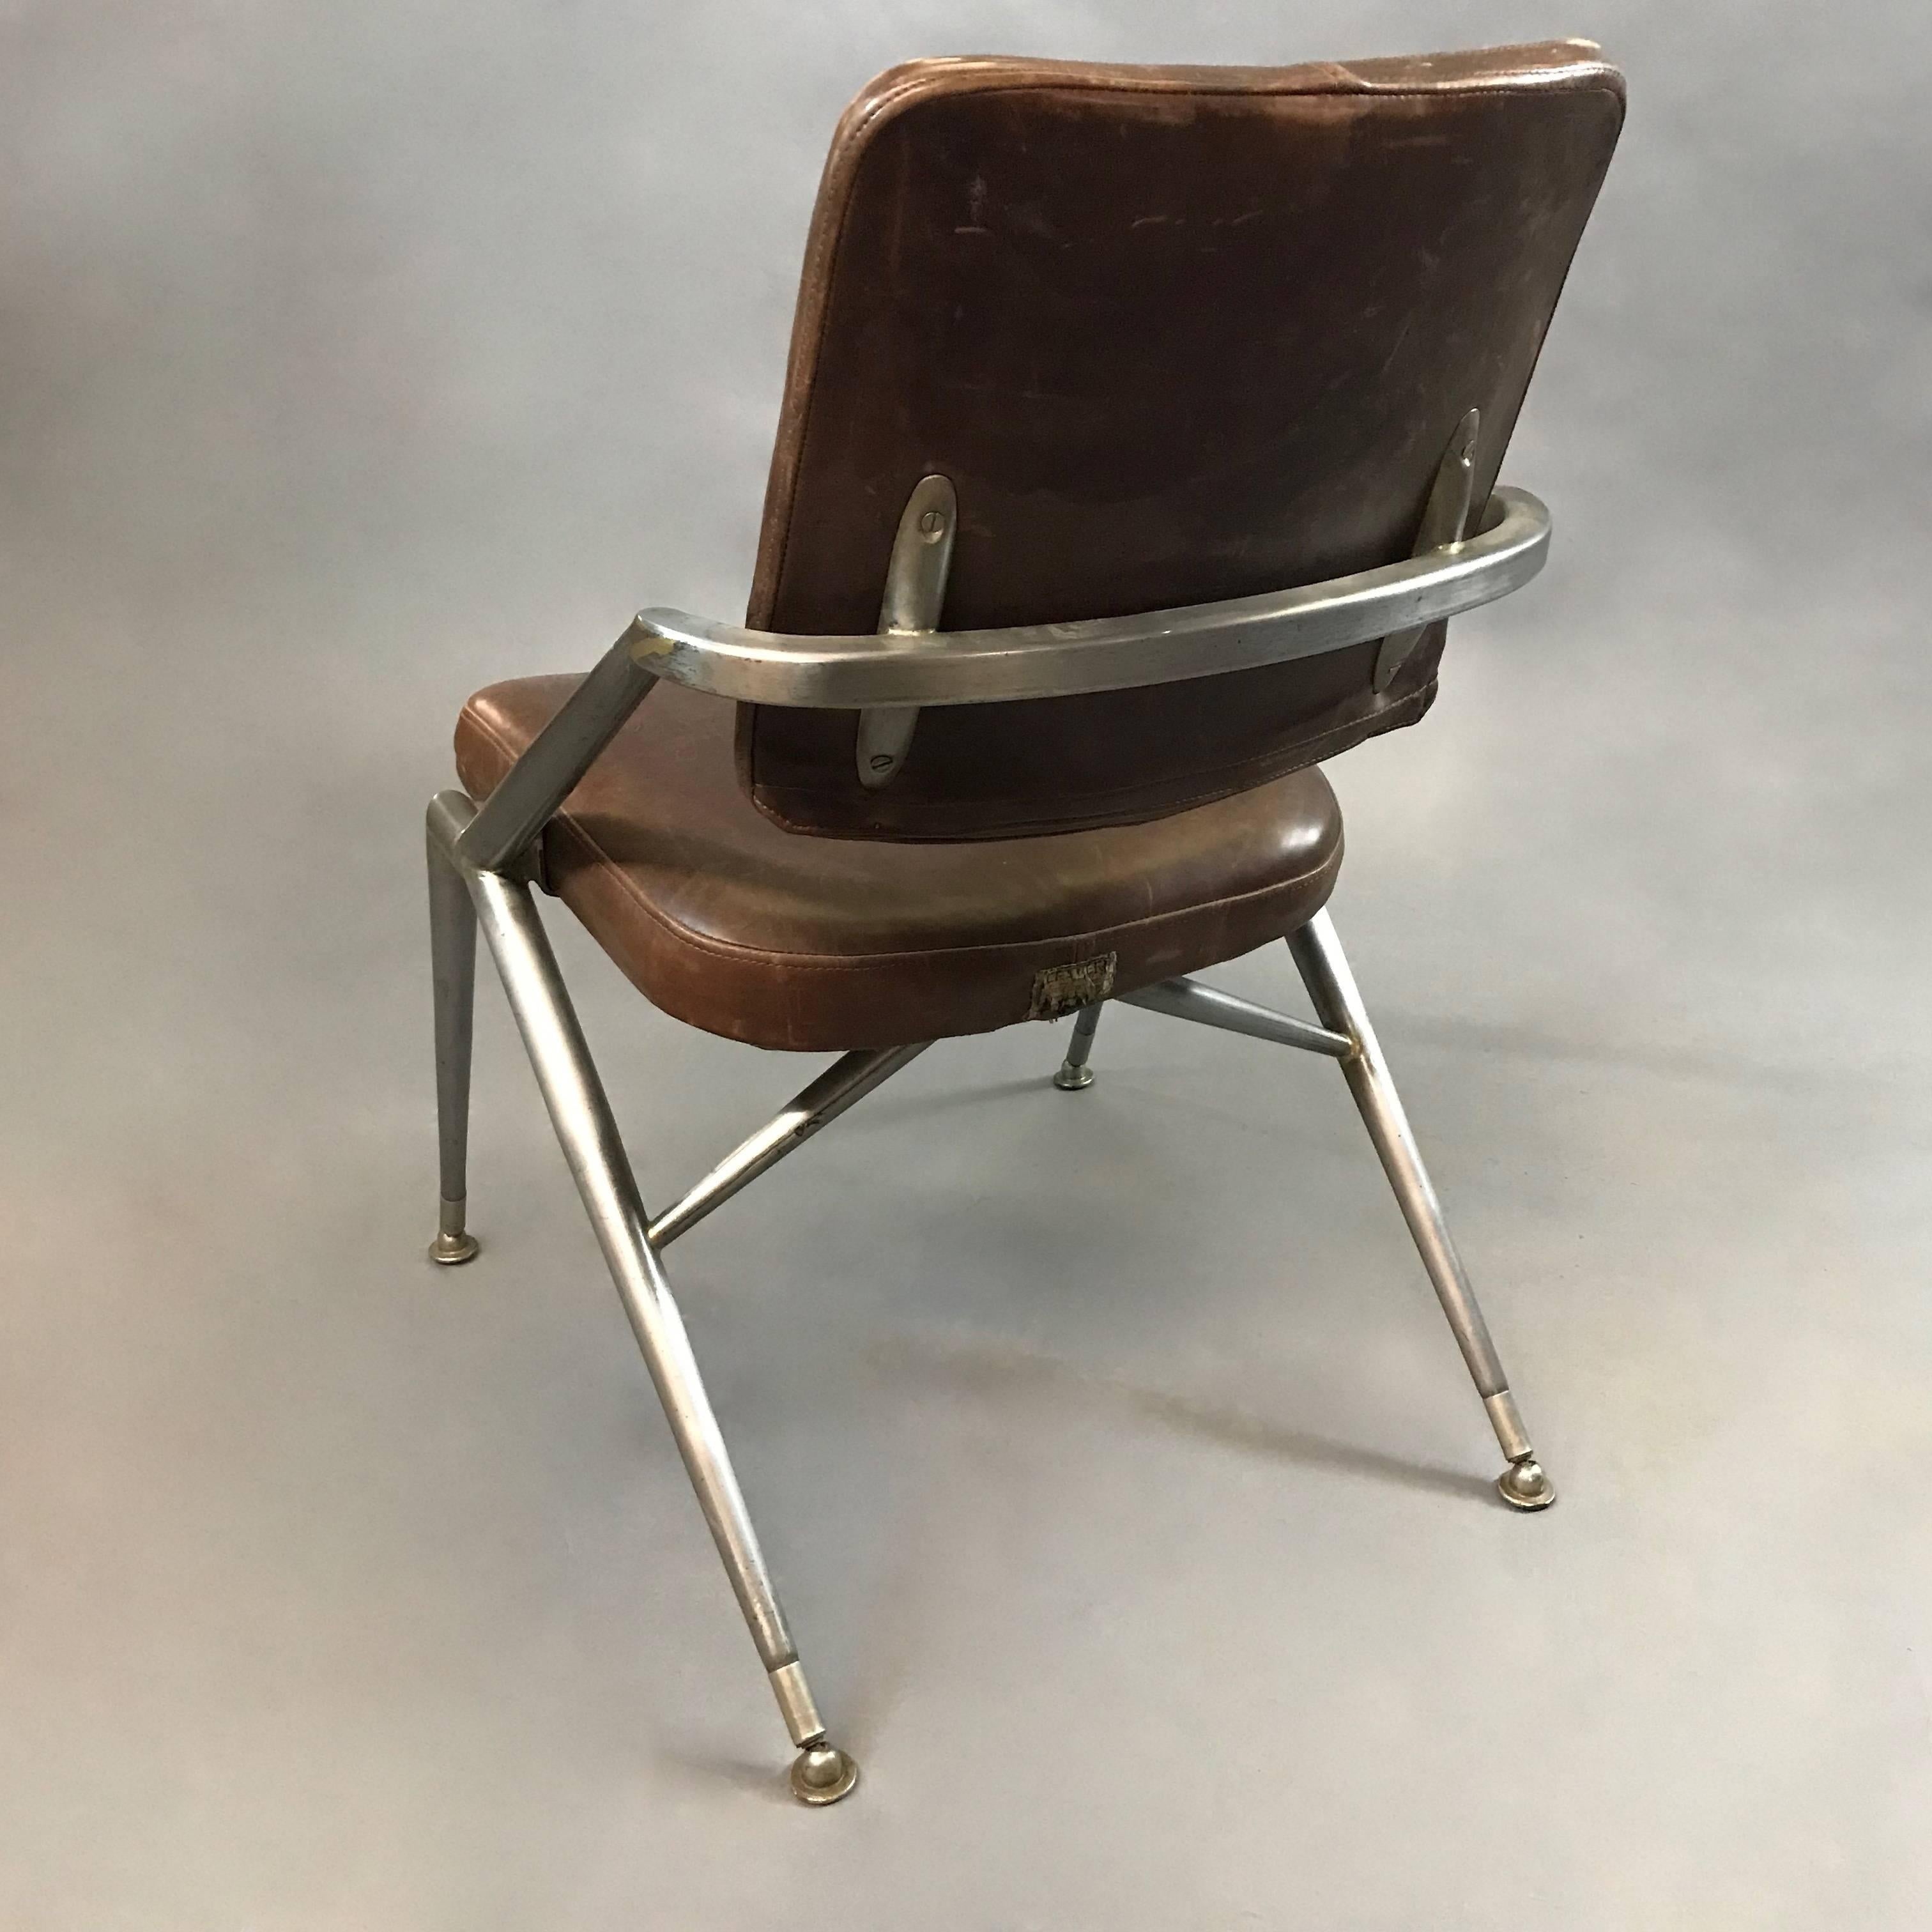 American Midcentury Steel and Leather Office Chair by Cramer For Sale